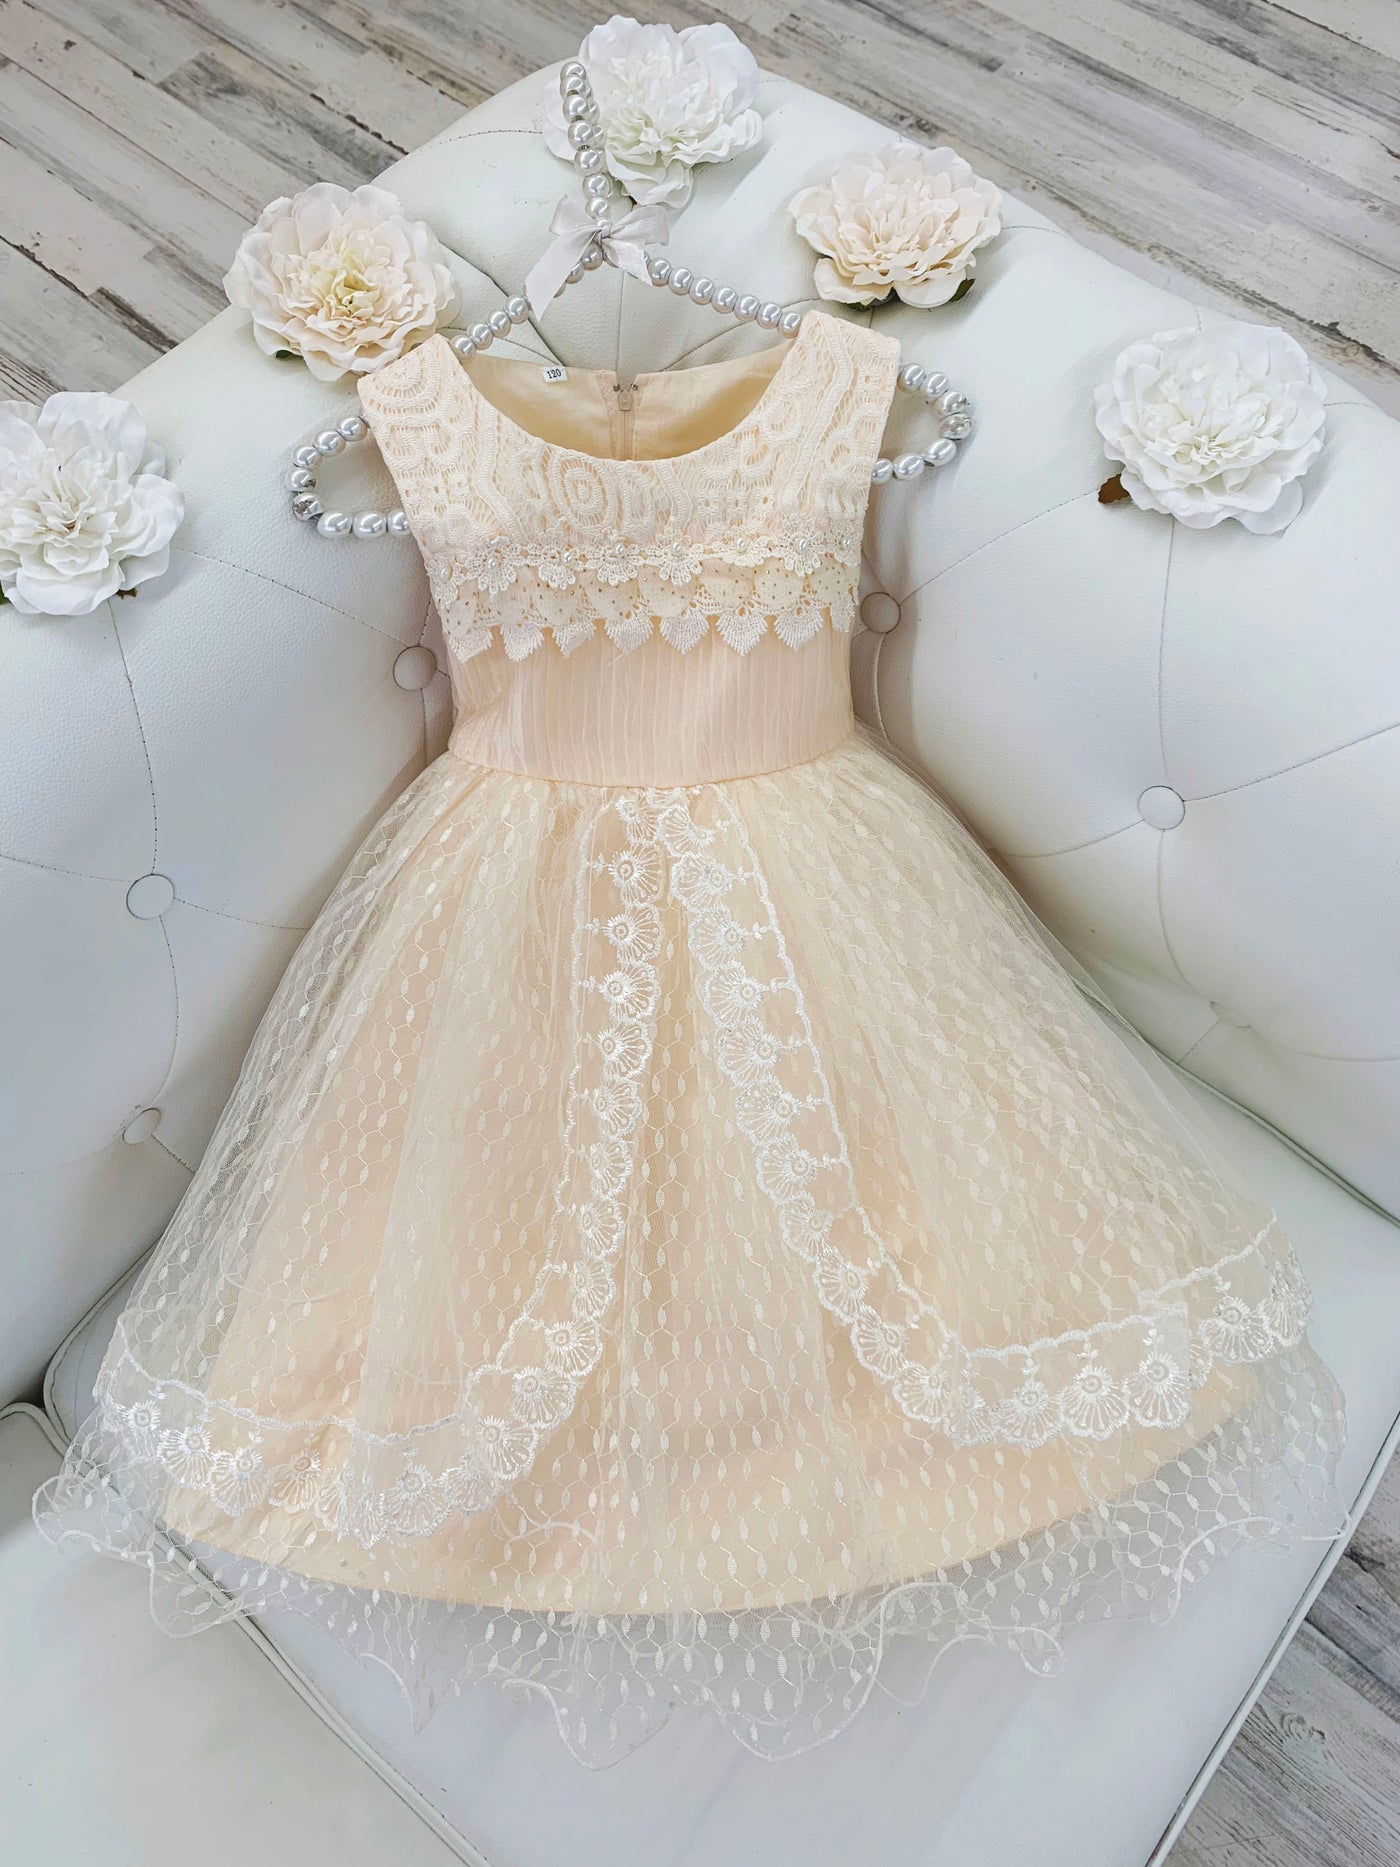 Girls Lace Sleeveless Floral Applique Tiered Lace Special Occasion Dress - Girls Fall Dressy Dress